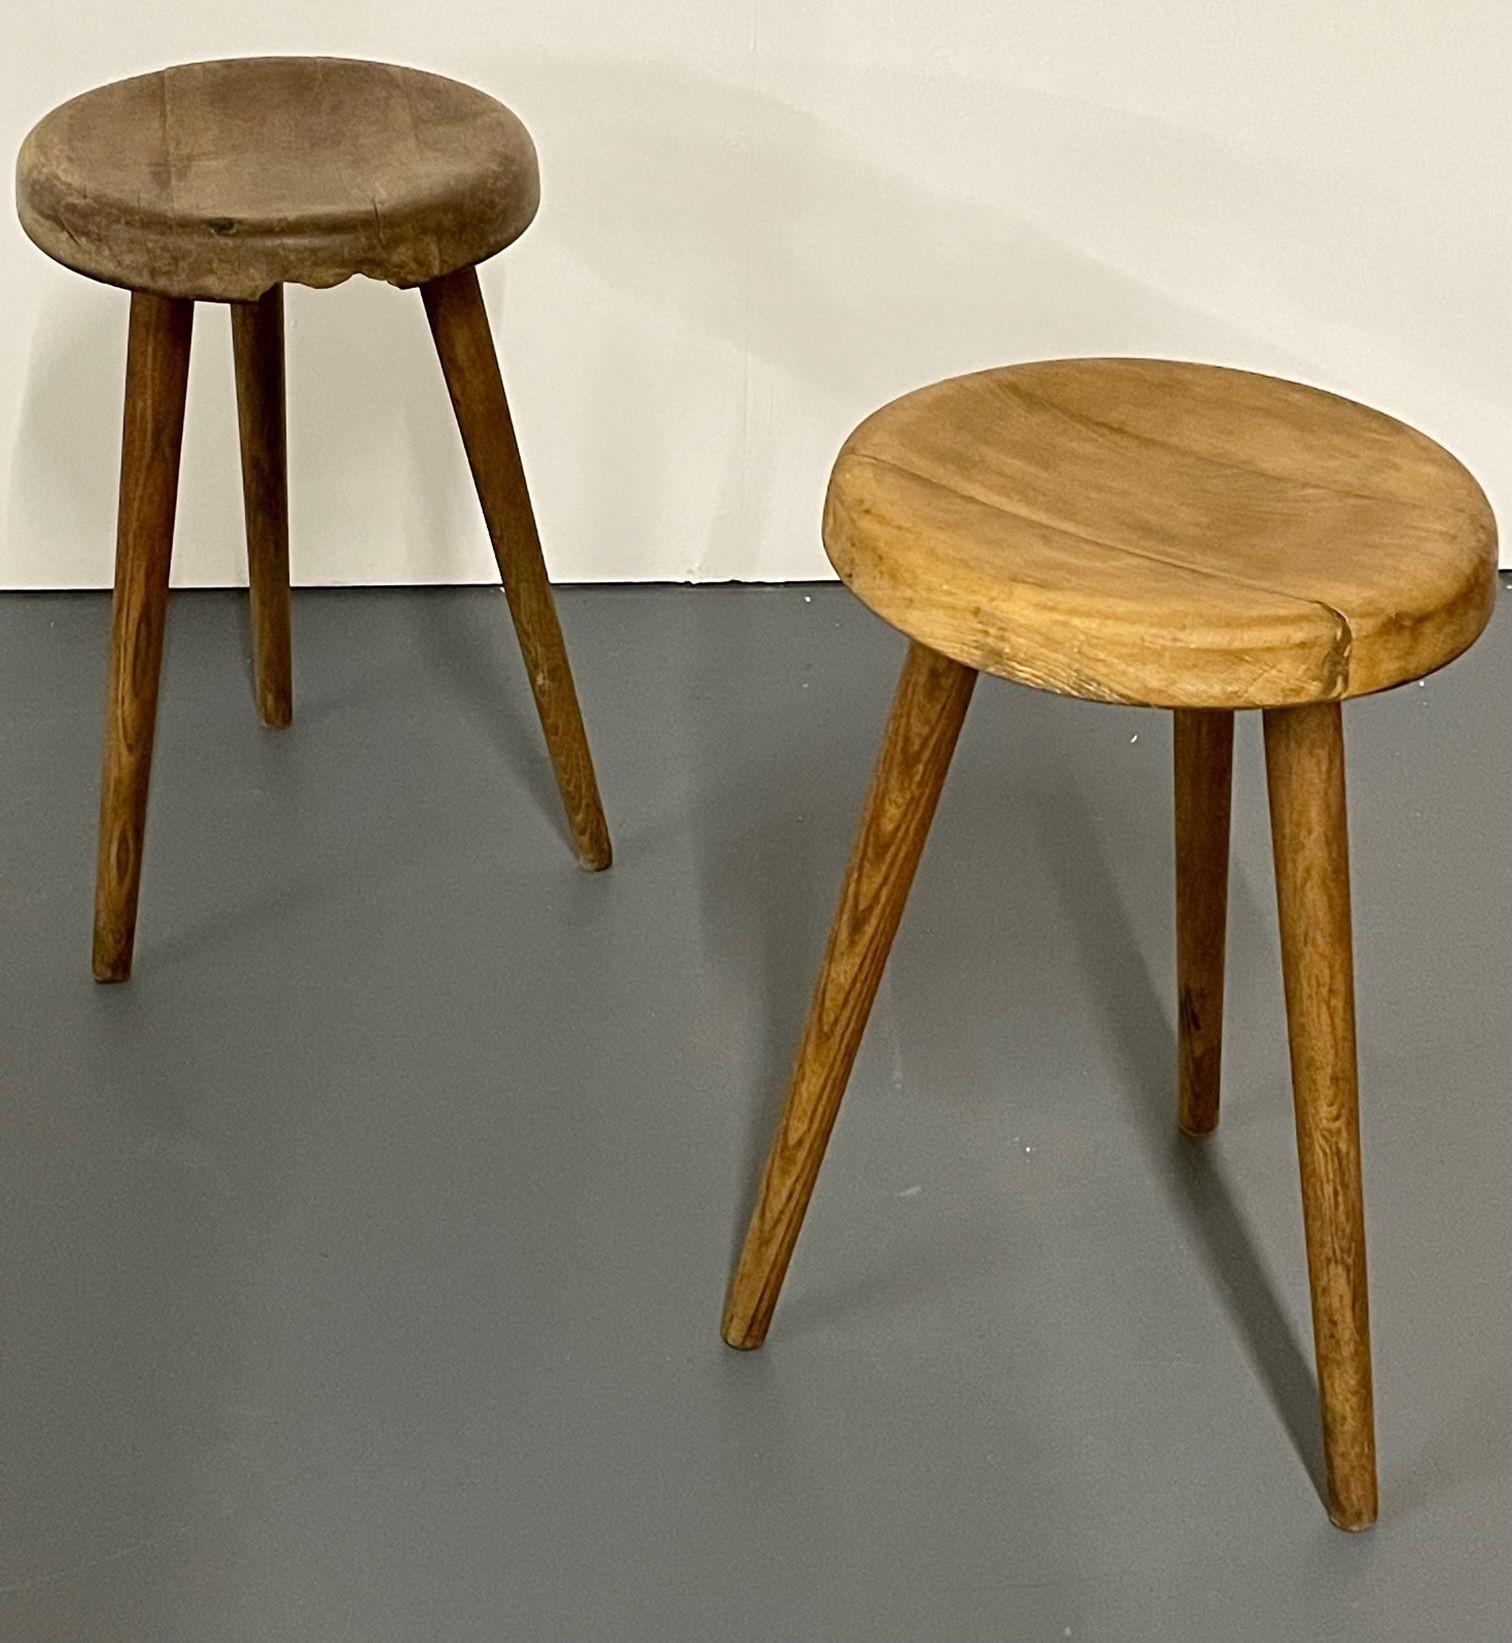 Mid-Century Modern Wooden French Provincial Stools, Charlotte Perriand Style In Good Condition For Sale In Stamford, CT